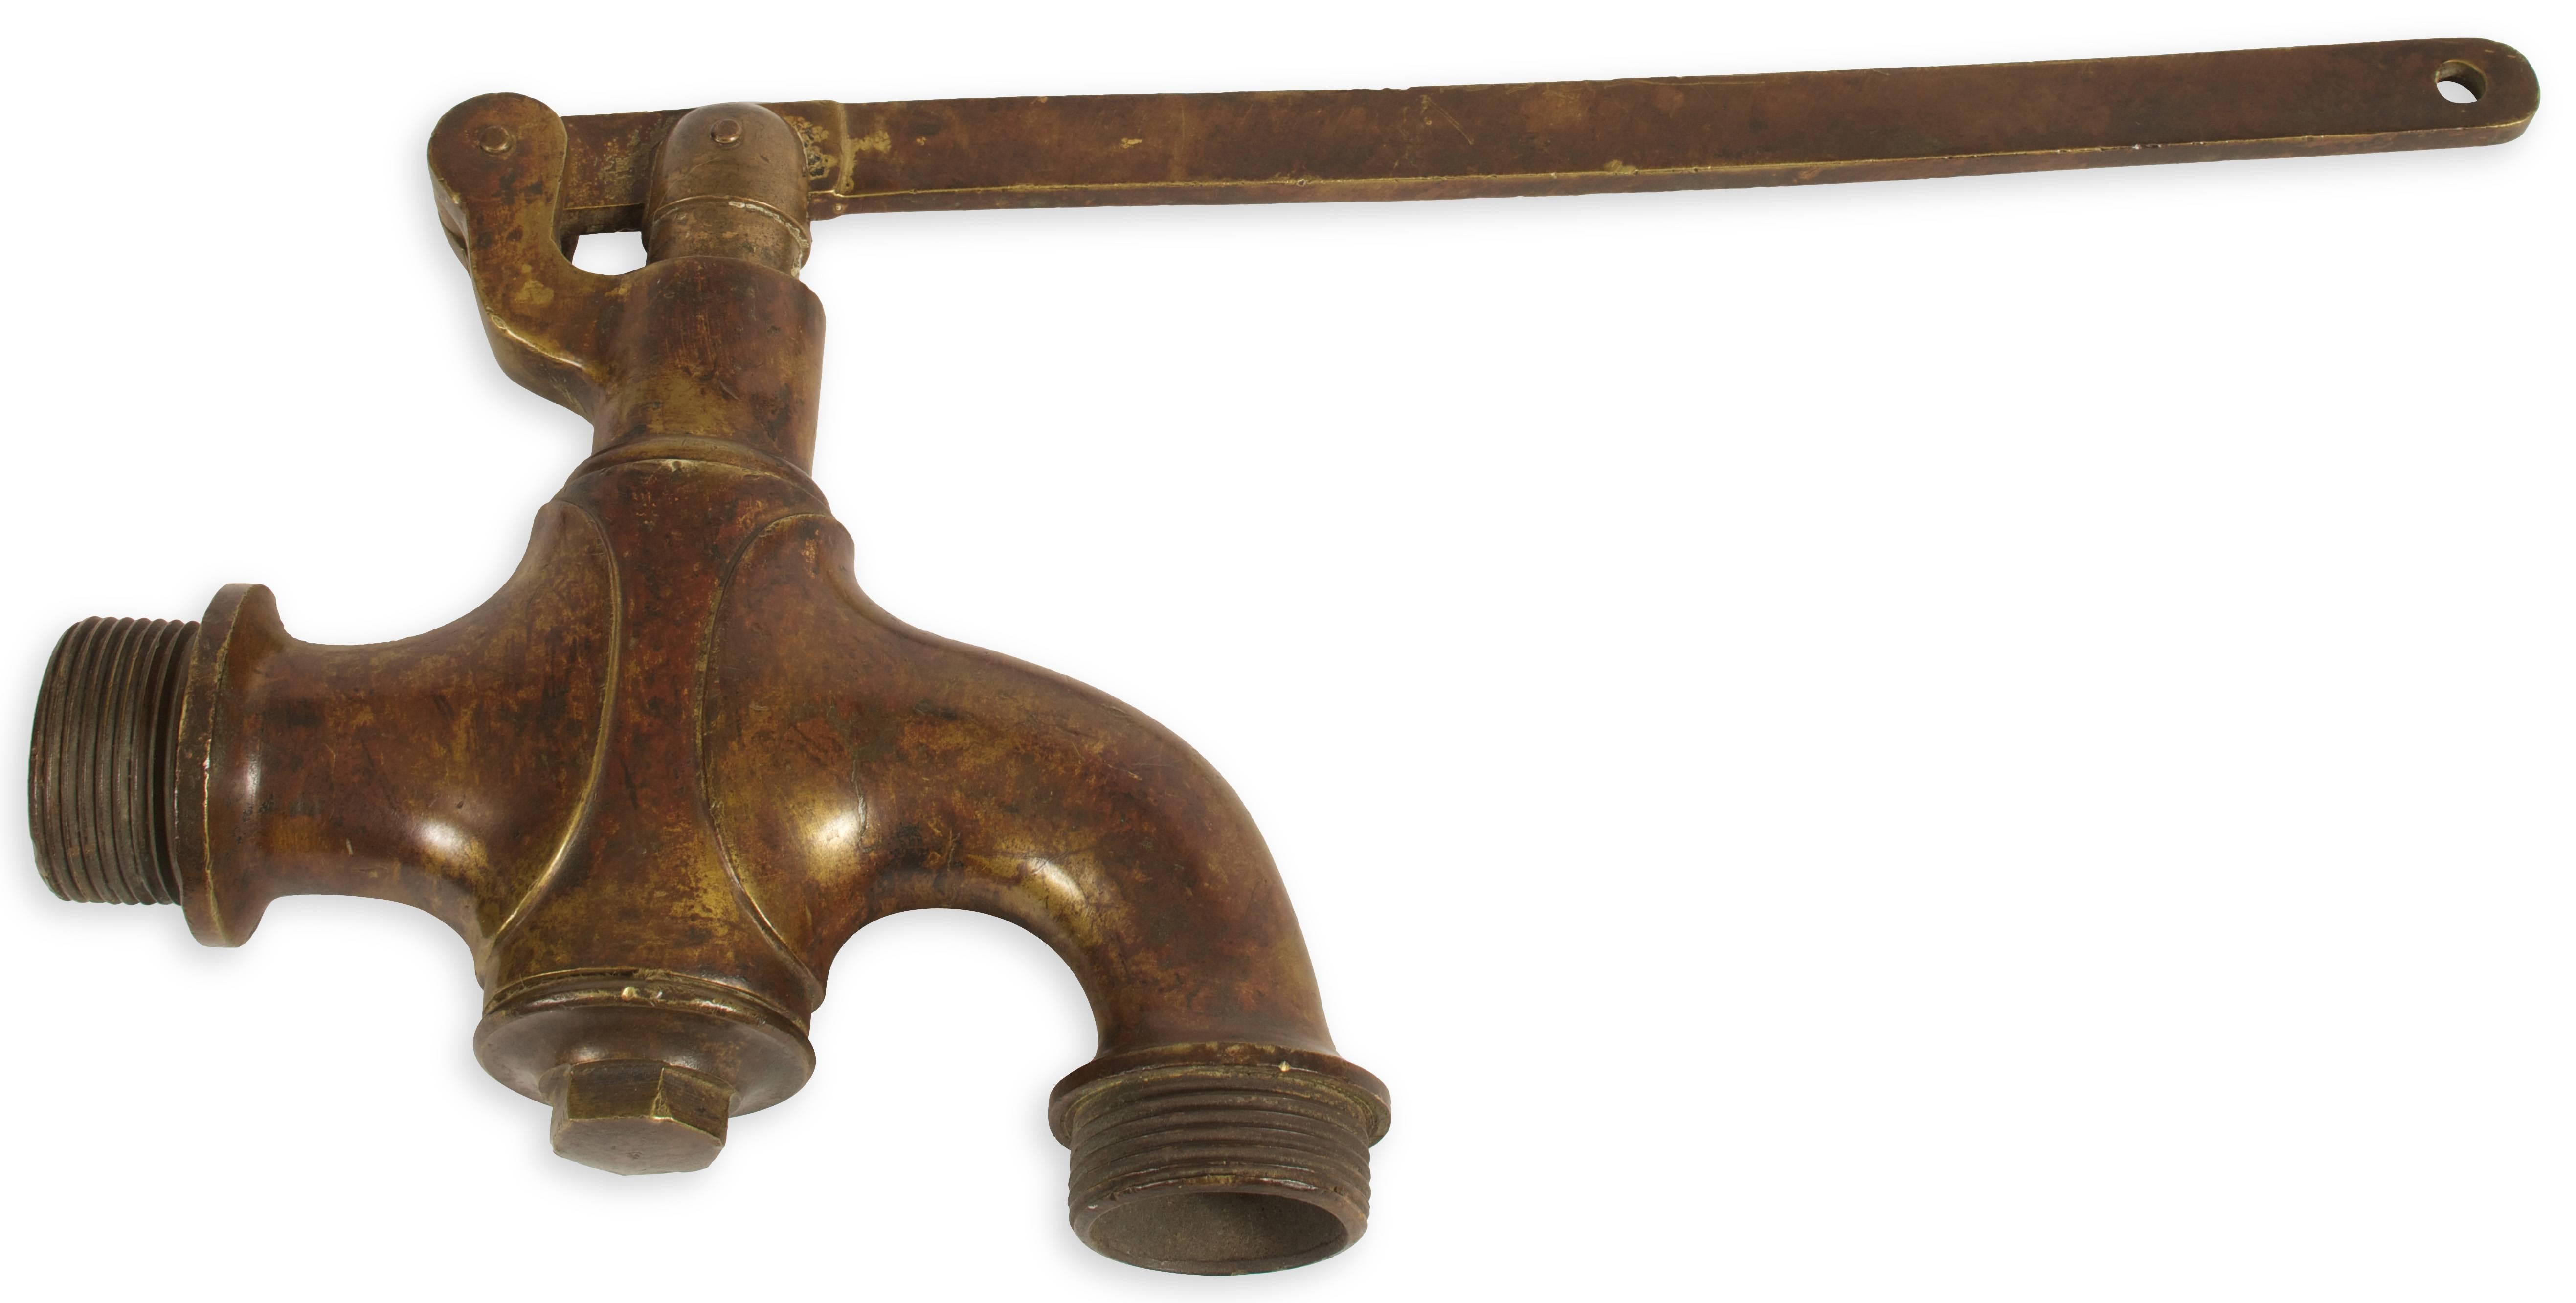 From France, the tap or faucet has a pump action. Great collectible for those knowledgable about wines. Can be adapted as a faucet for garden sink or workroom sink a la Bunny Williams' bathroom set-up.